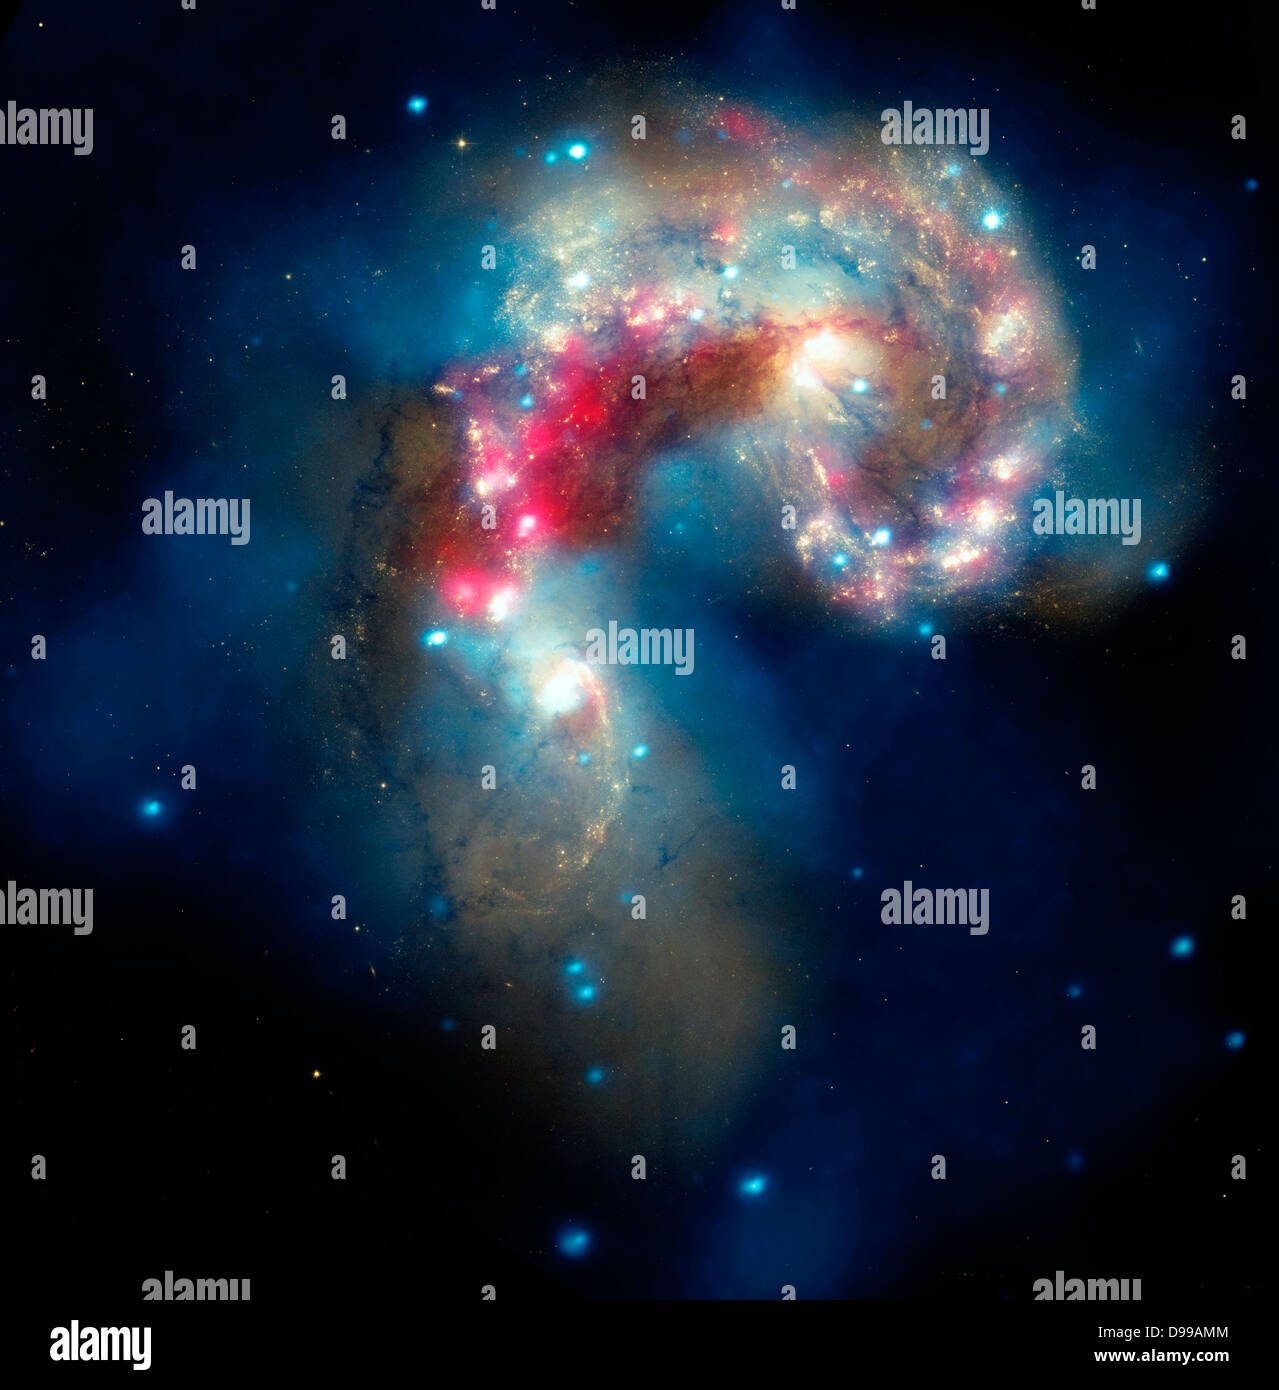 The Antennae galaxies, located about 62 million light-years from Earth, are shown in this composite image. The collision, which began more than 100 million years ago and is still occurring, has triggered the formation of millions of stars in clouds of dusts and gas in the galaxies. Hubble and Spitzer. Stock Photo